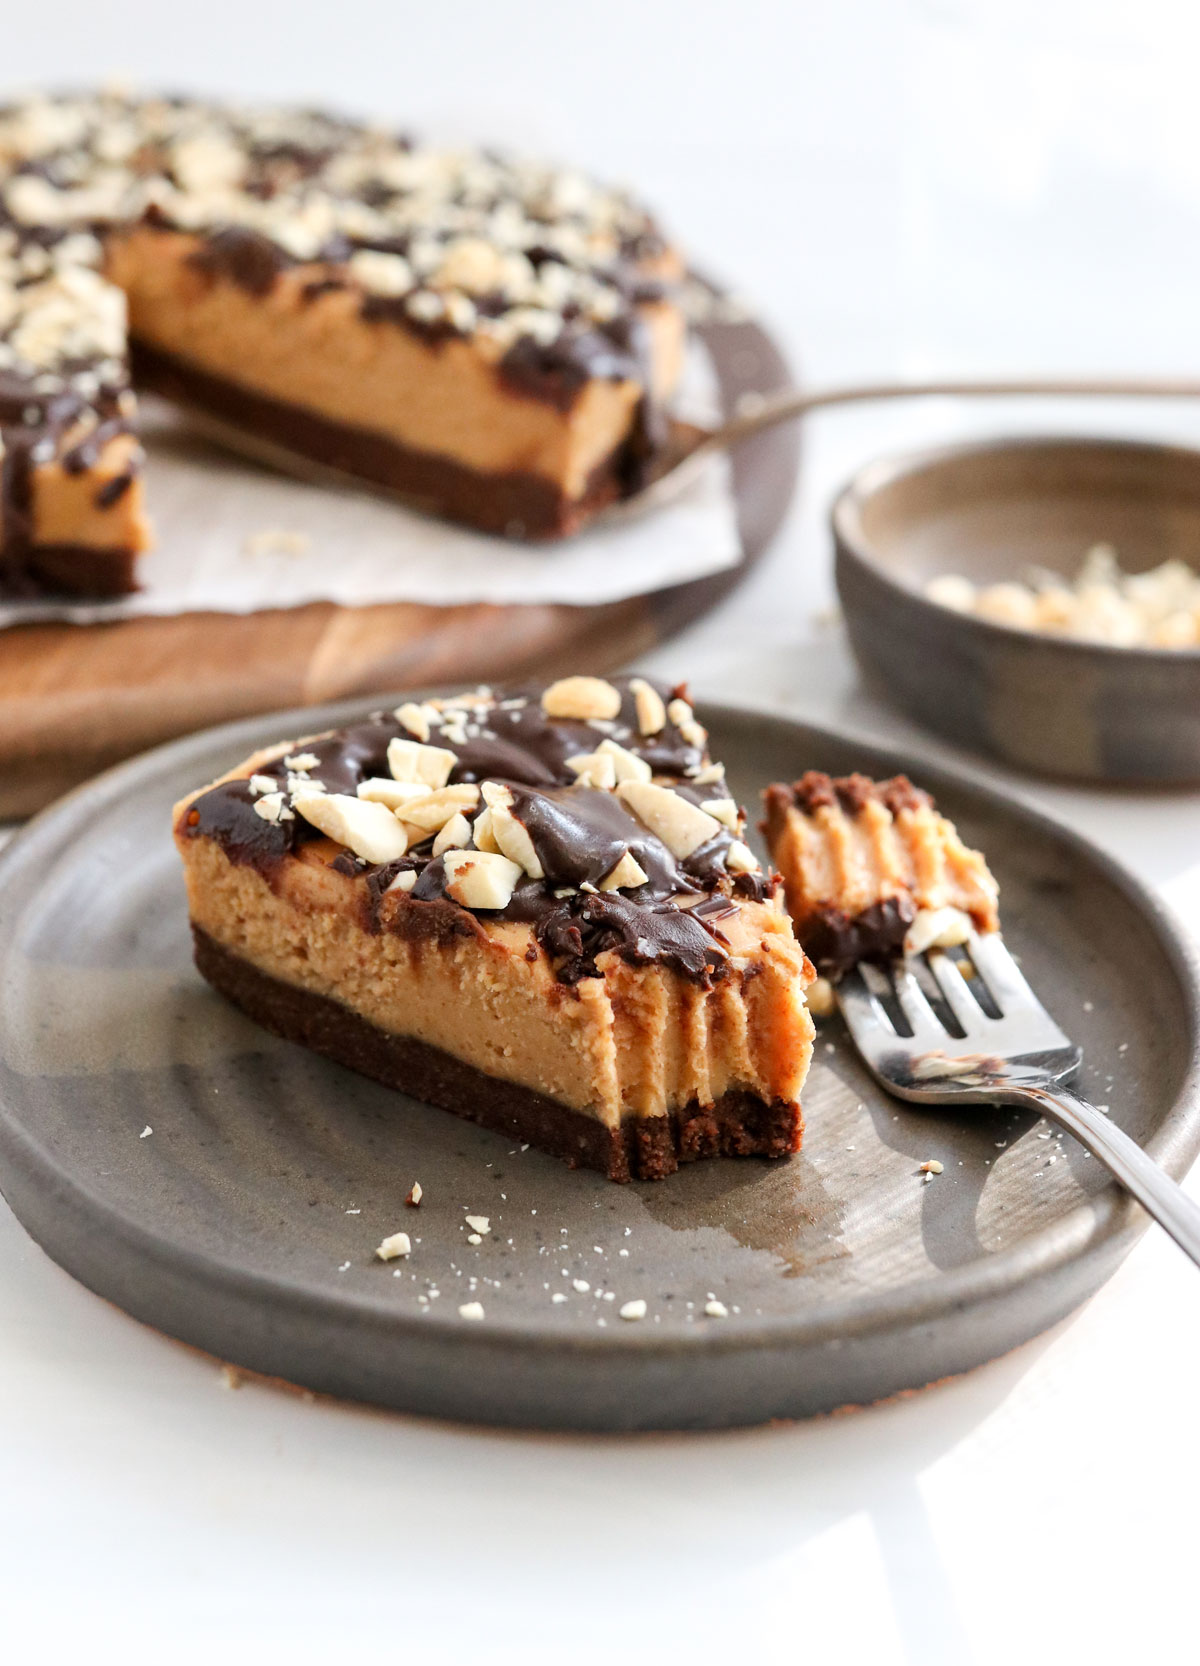 peanut butter pie slice on plate with forkful removed